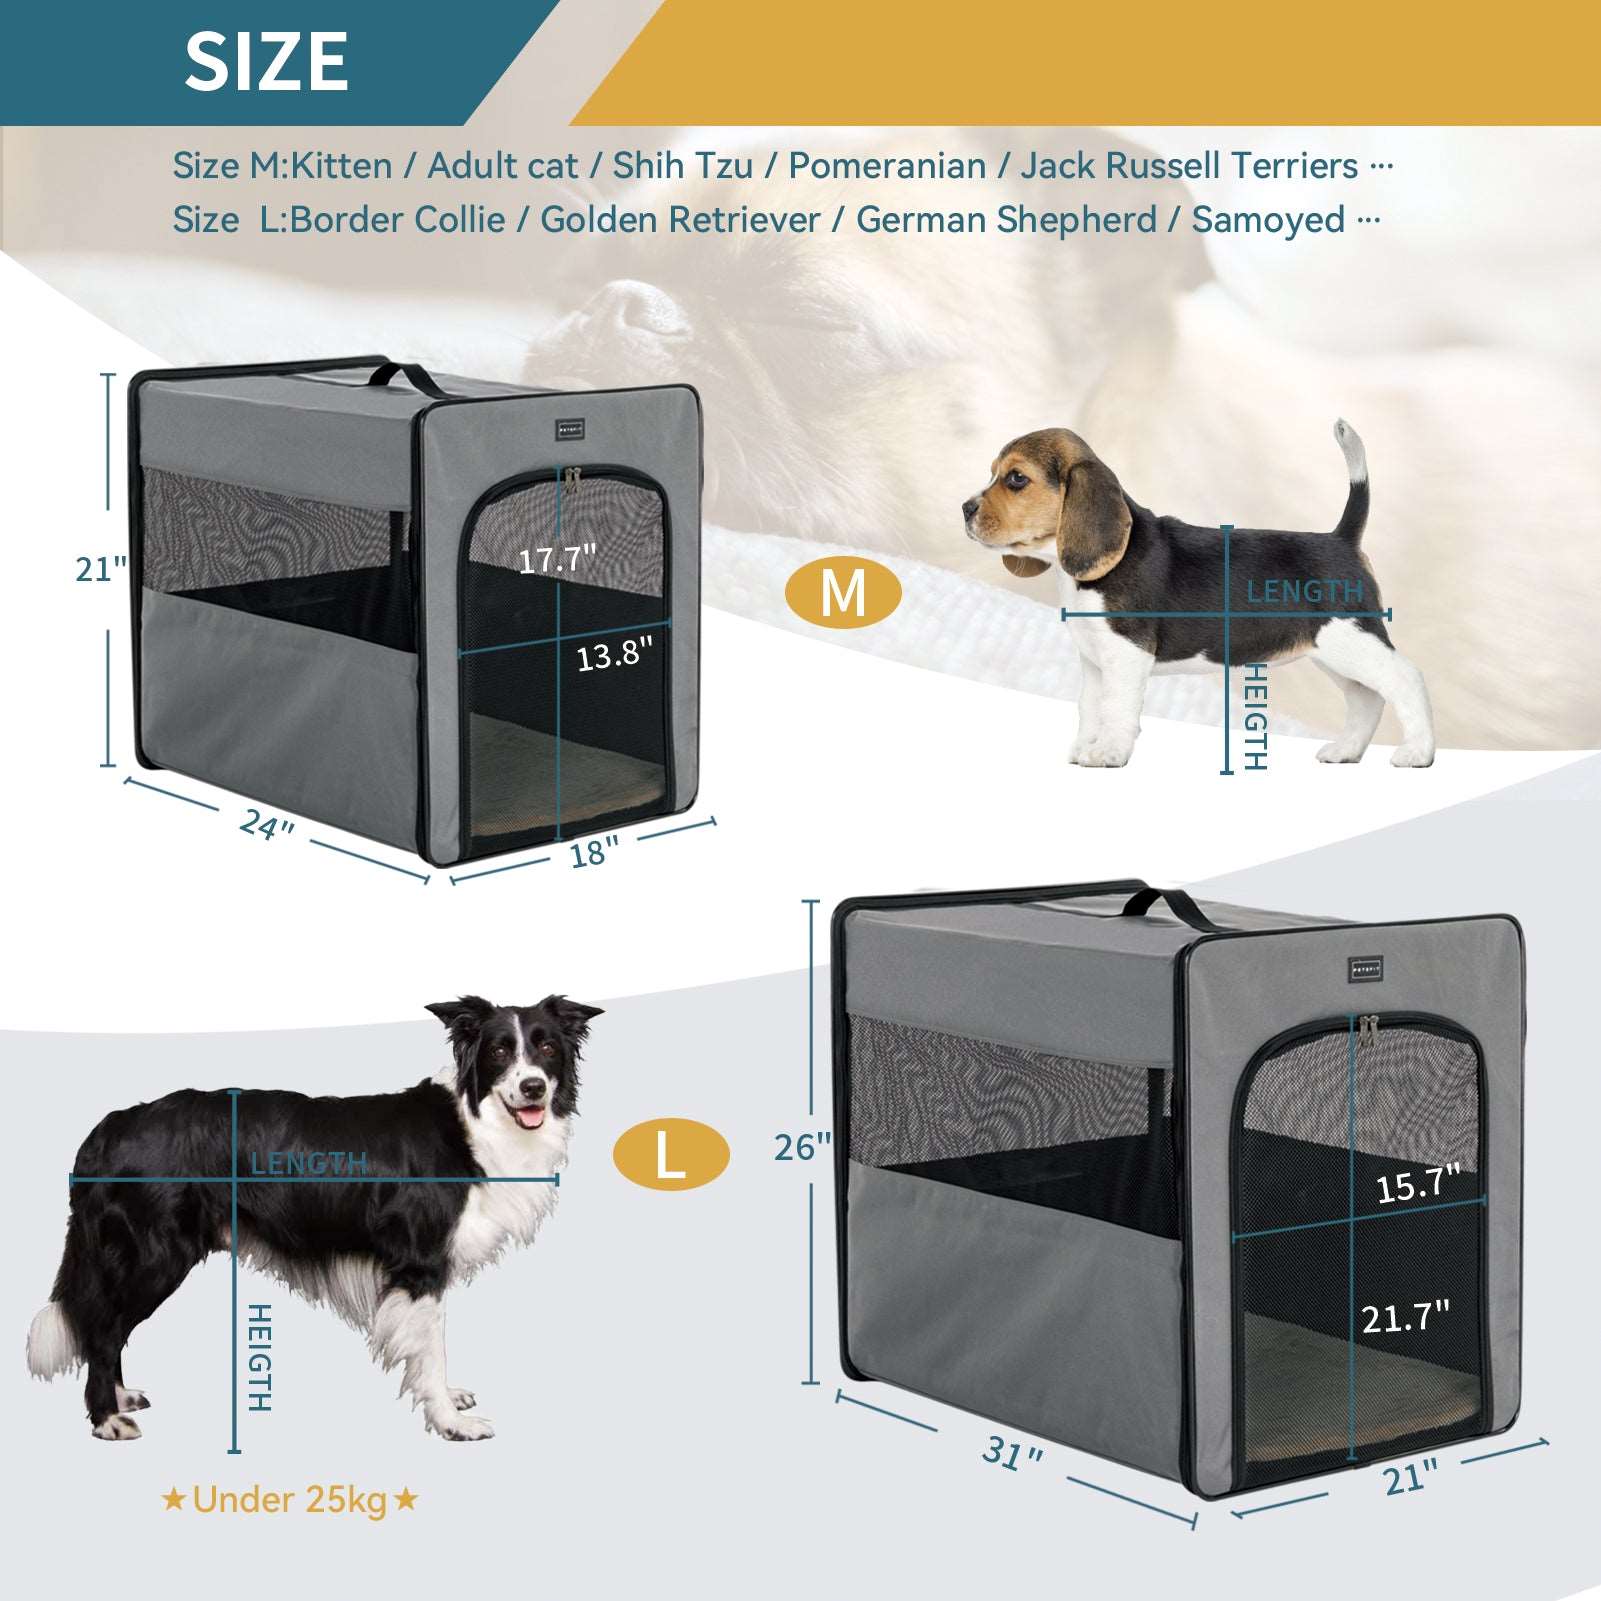 Petsfit-Portable-Dog-Crate-24-Inch-07